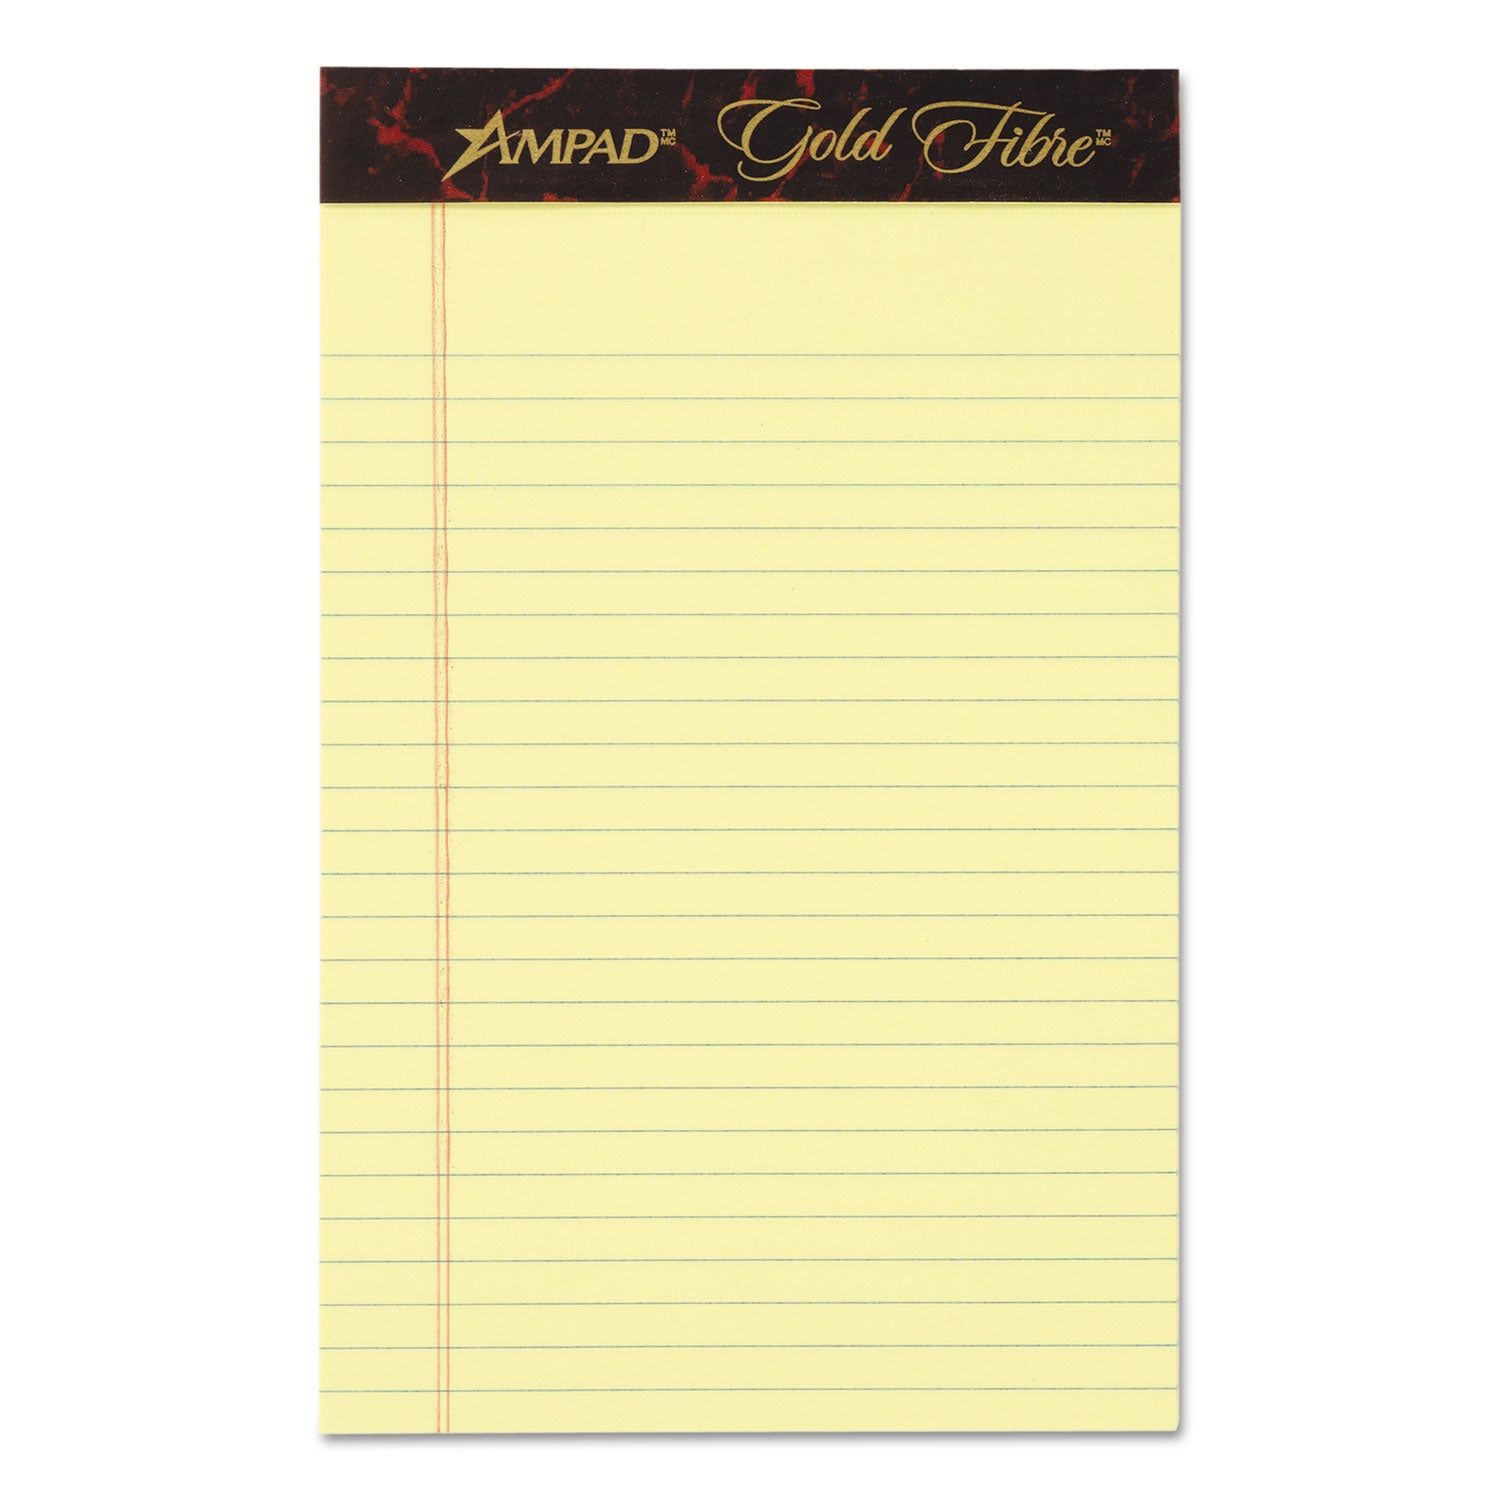 Gold Fibre Quality Writing Pads, Medium/College Rule, 50 Canary-Yellow 5 x 8 Sheets, Dozen - 